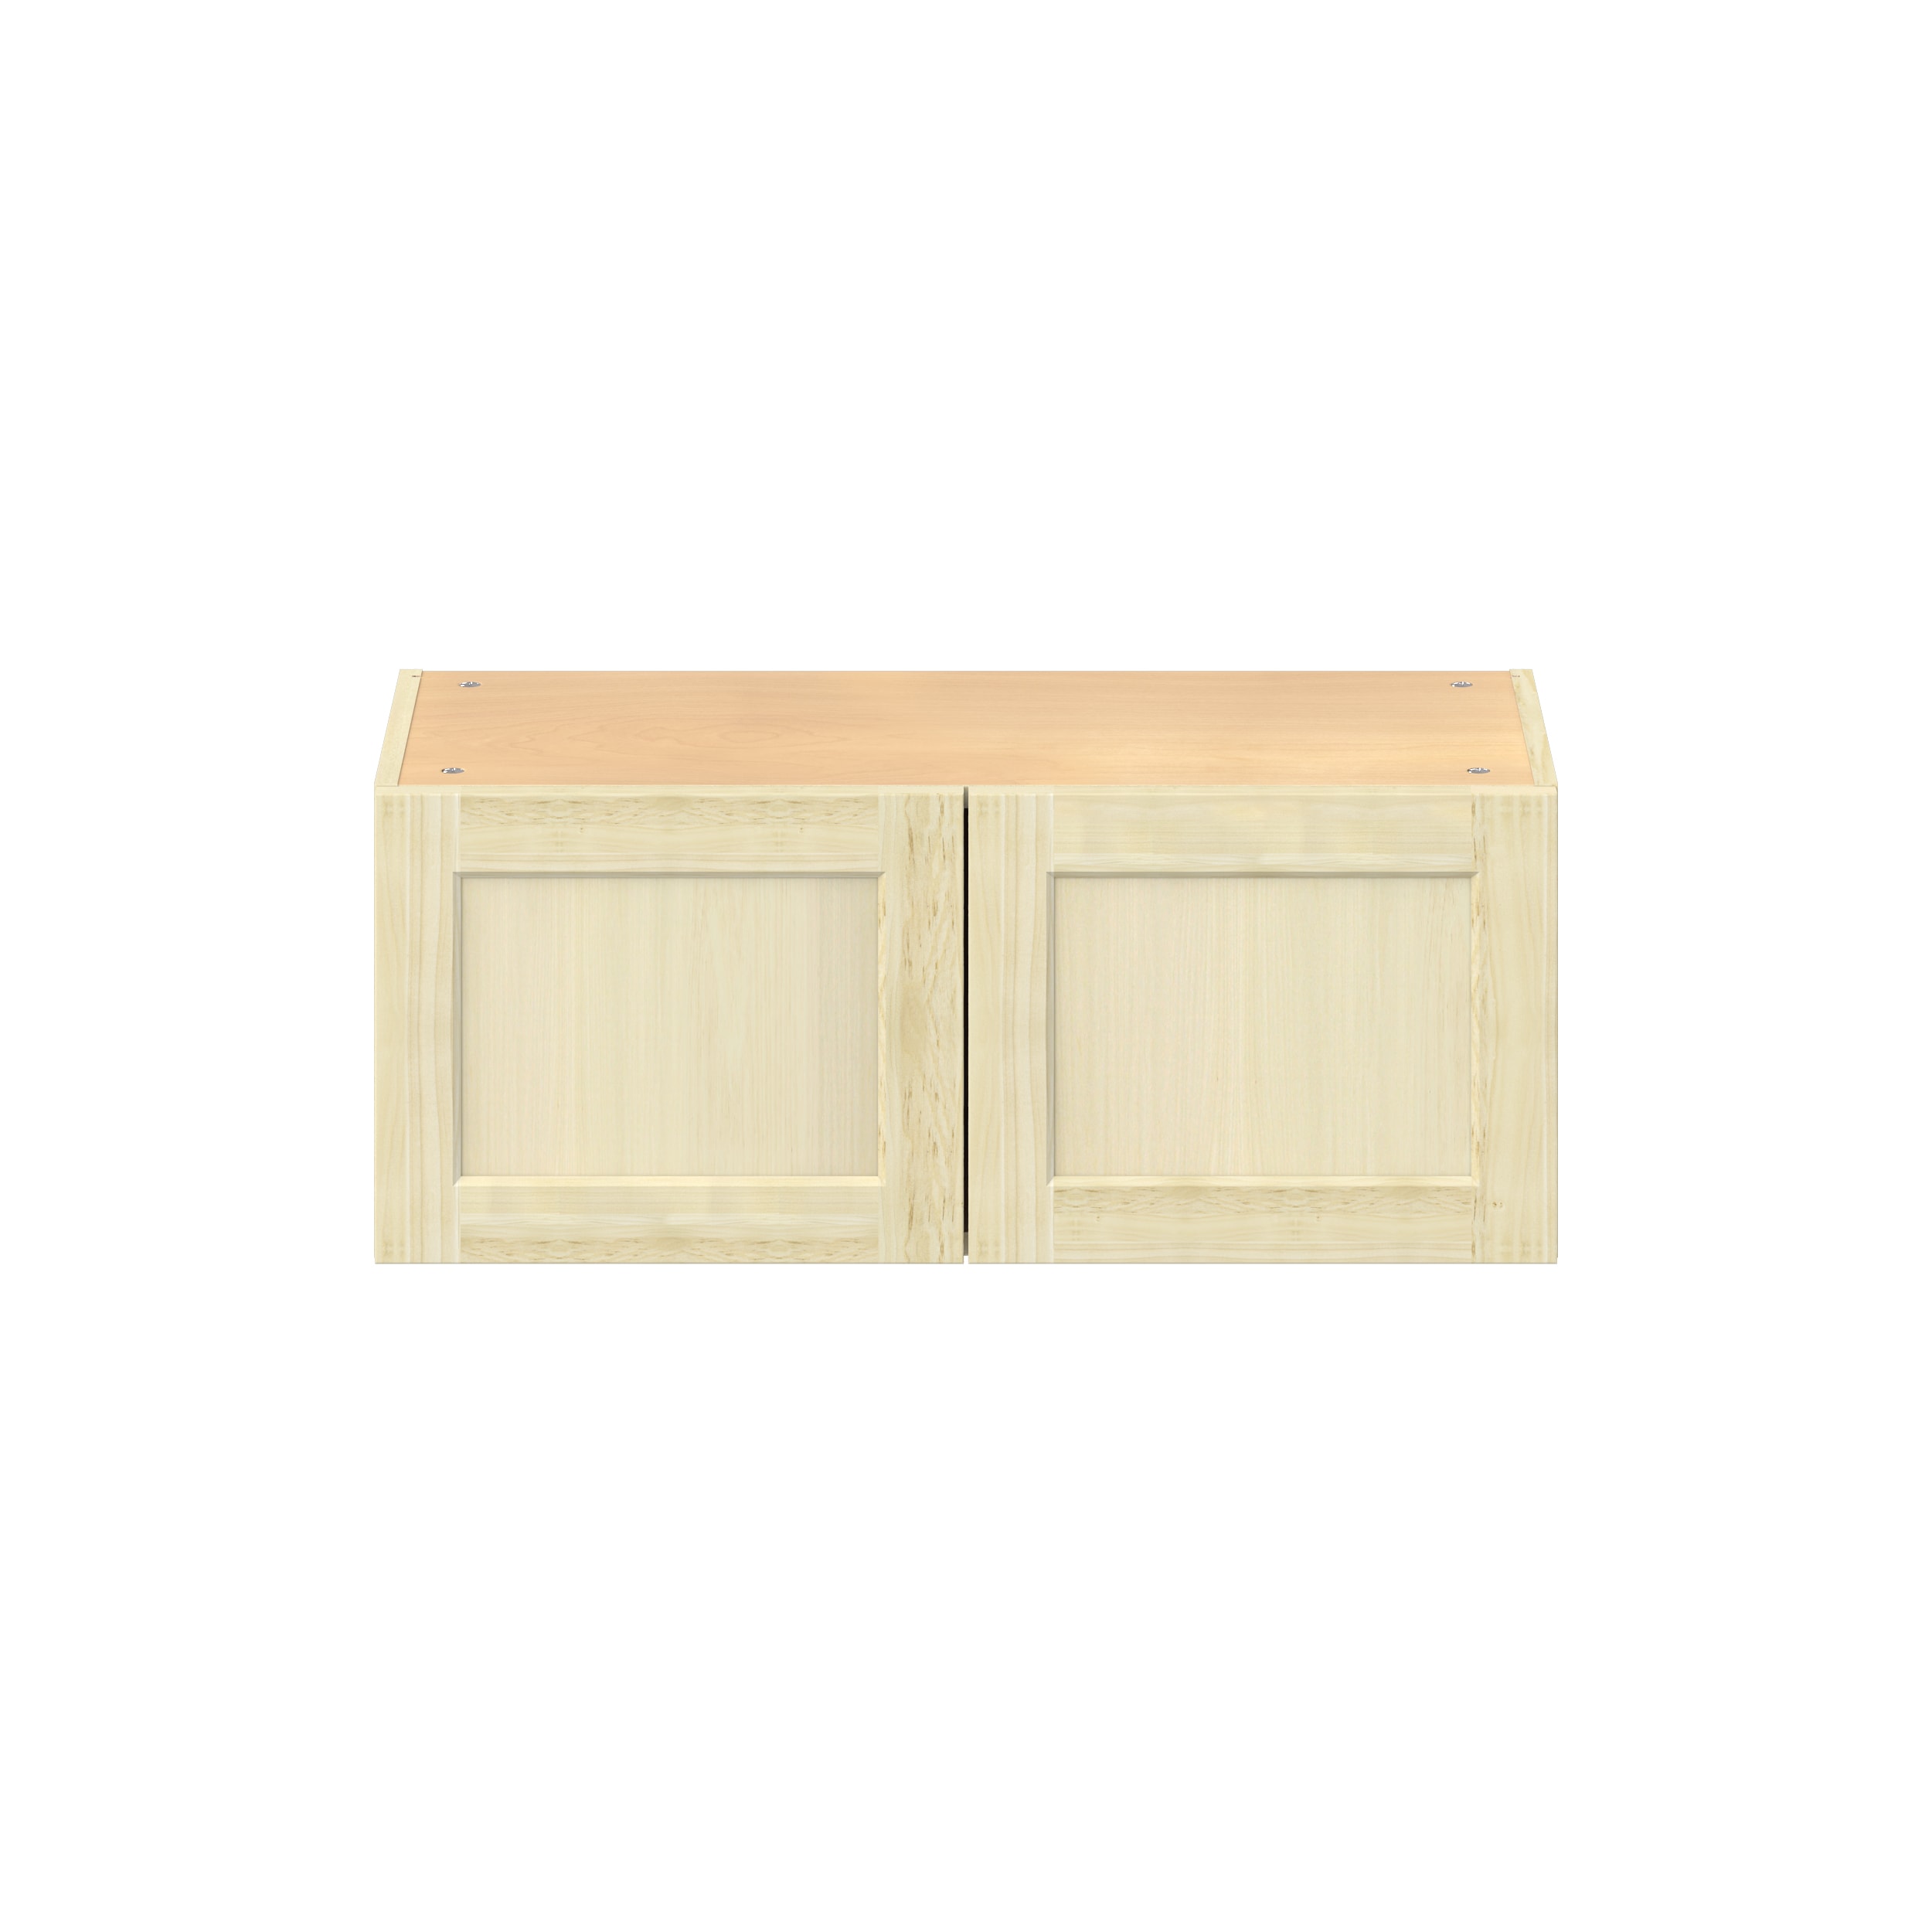 Project Source Omaha Unfinished 30-in W x 30-in H x 12.5-in D Unfinished  Poplar Door Wall Ready To Assemble Cabinet (Recessed Panel Shaker Door  Style)